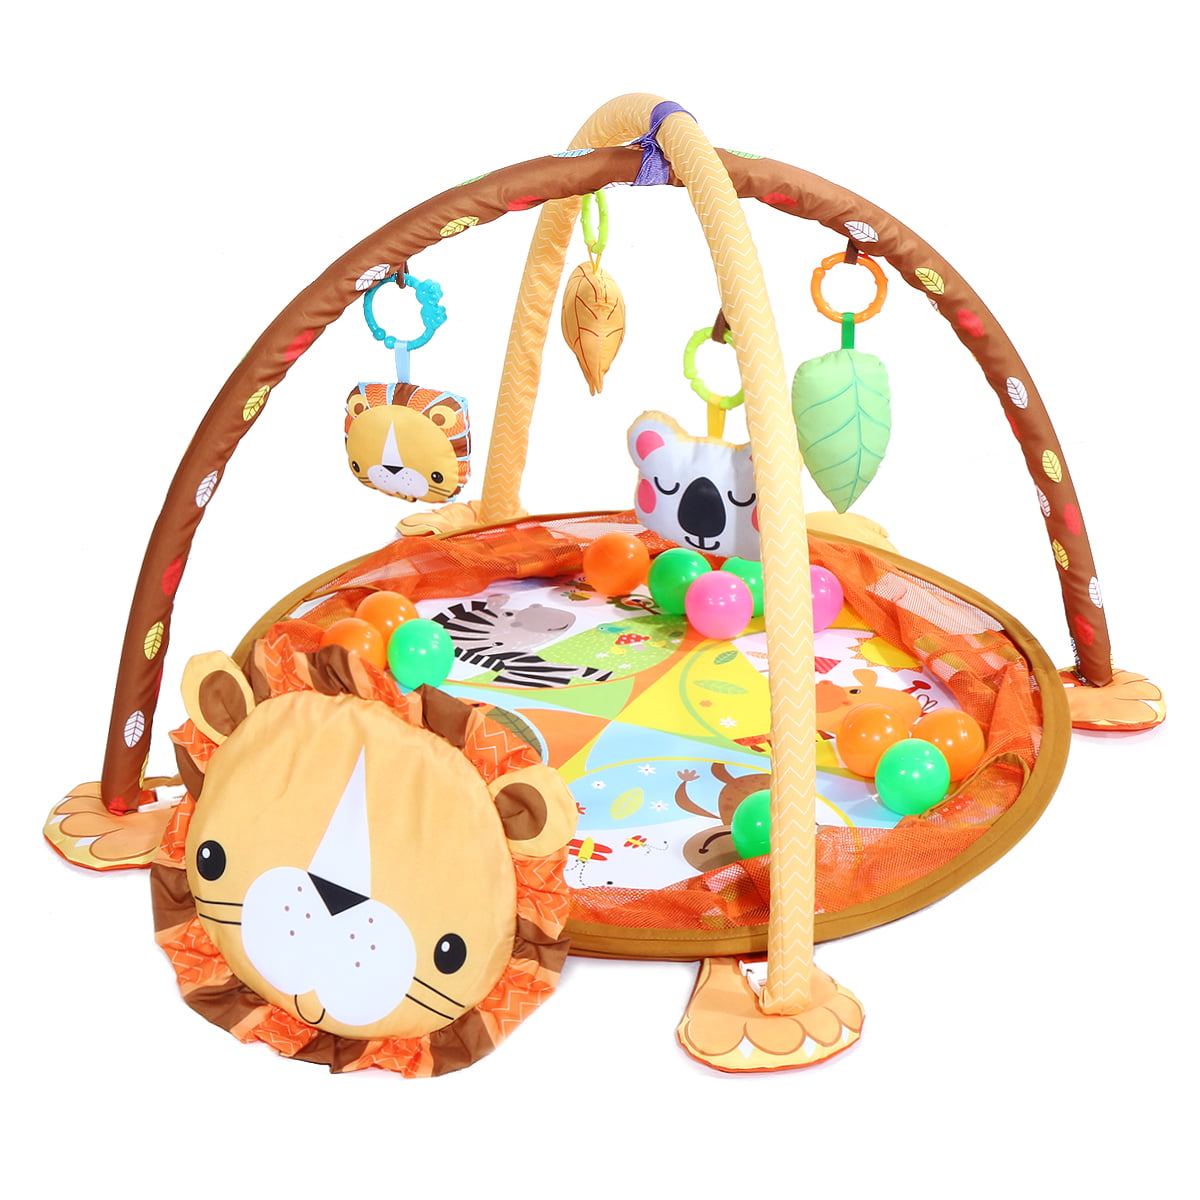 baby mat with hanging toys